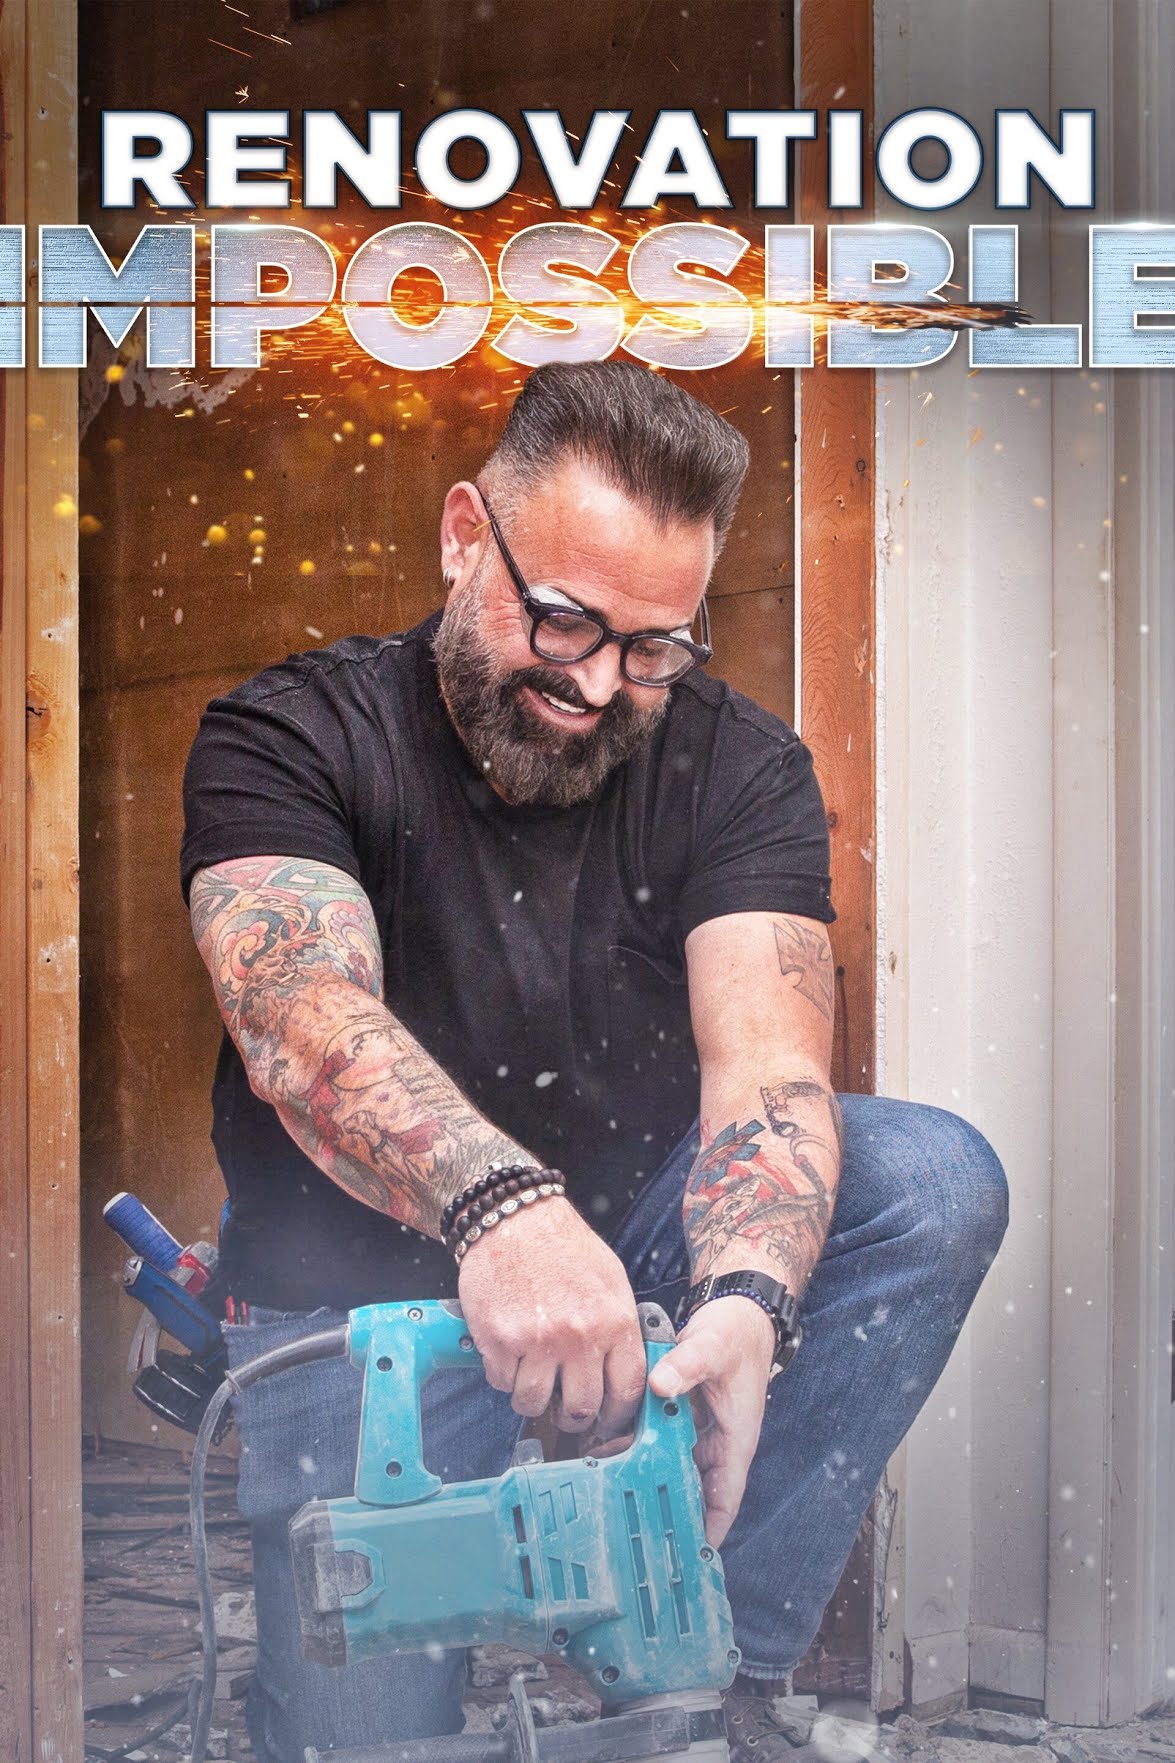 ‘Renovation Impossible’ Premieres Tonight at 9/8c on HGTV!